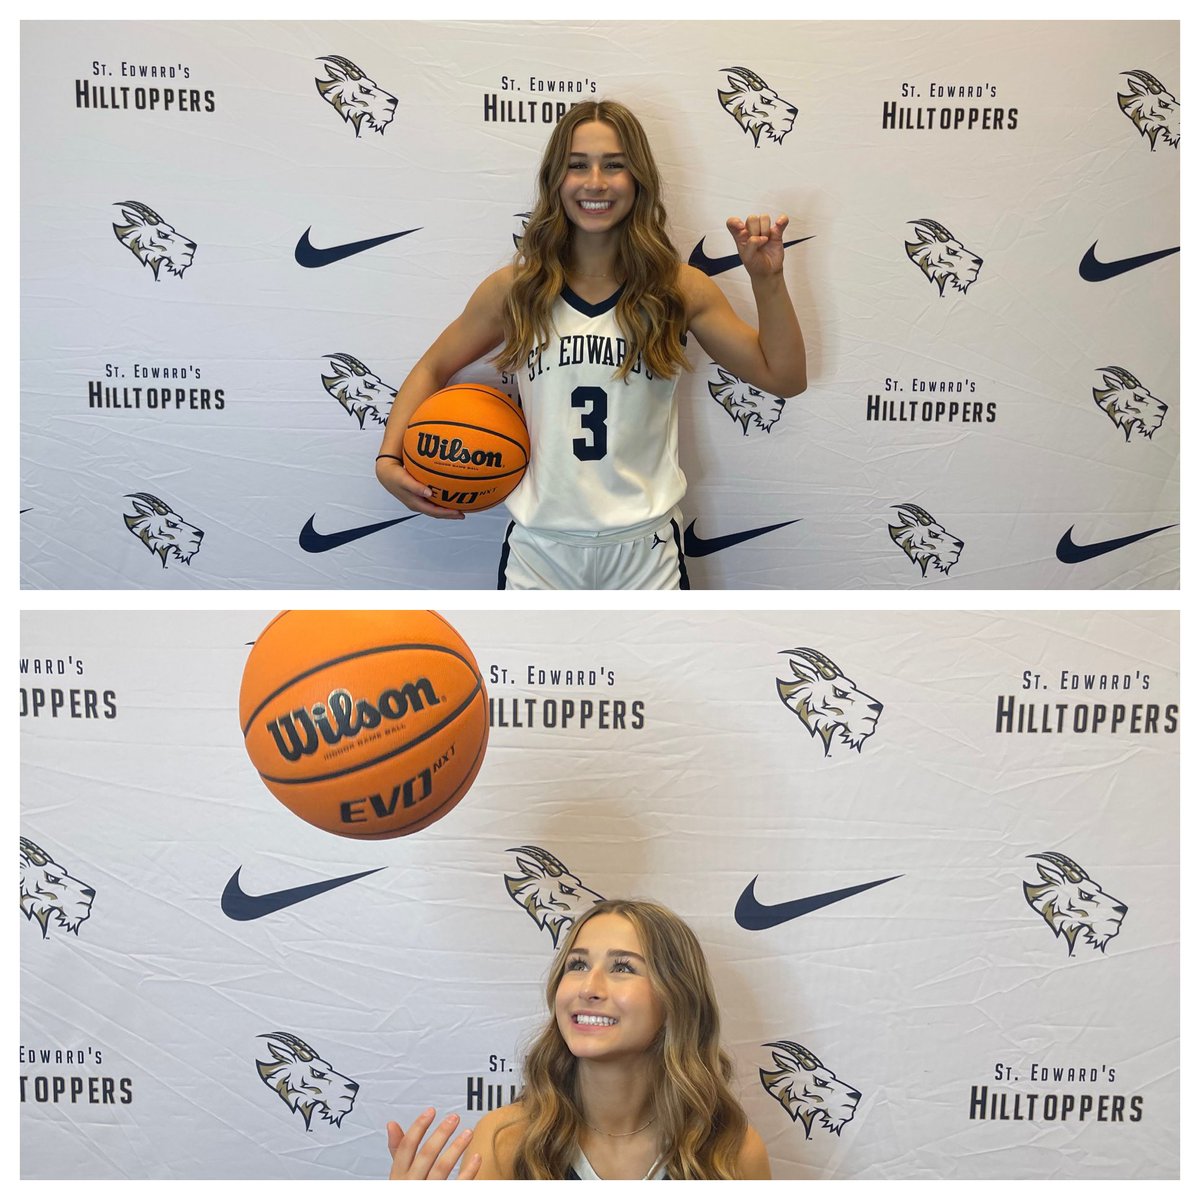 Our girl @aaddiemccormick had an incredible time on her official visit to @SEUWBasketball today! Looking good in the Hilltopper uniform☺️ @CoachJJRiehlSEU is getting a good one! #D2ball #CollegeBall #slay #phoenixProud #phoenixPhamily @EVGirlsBkb